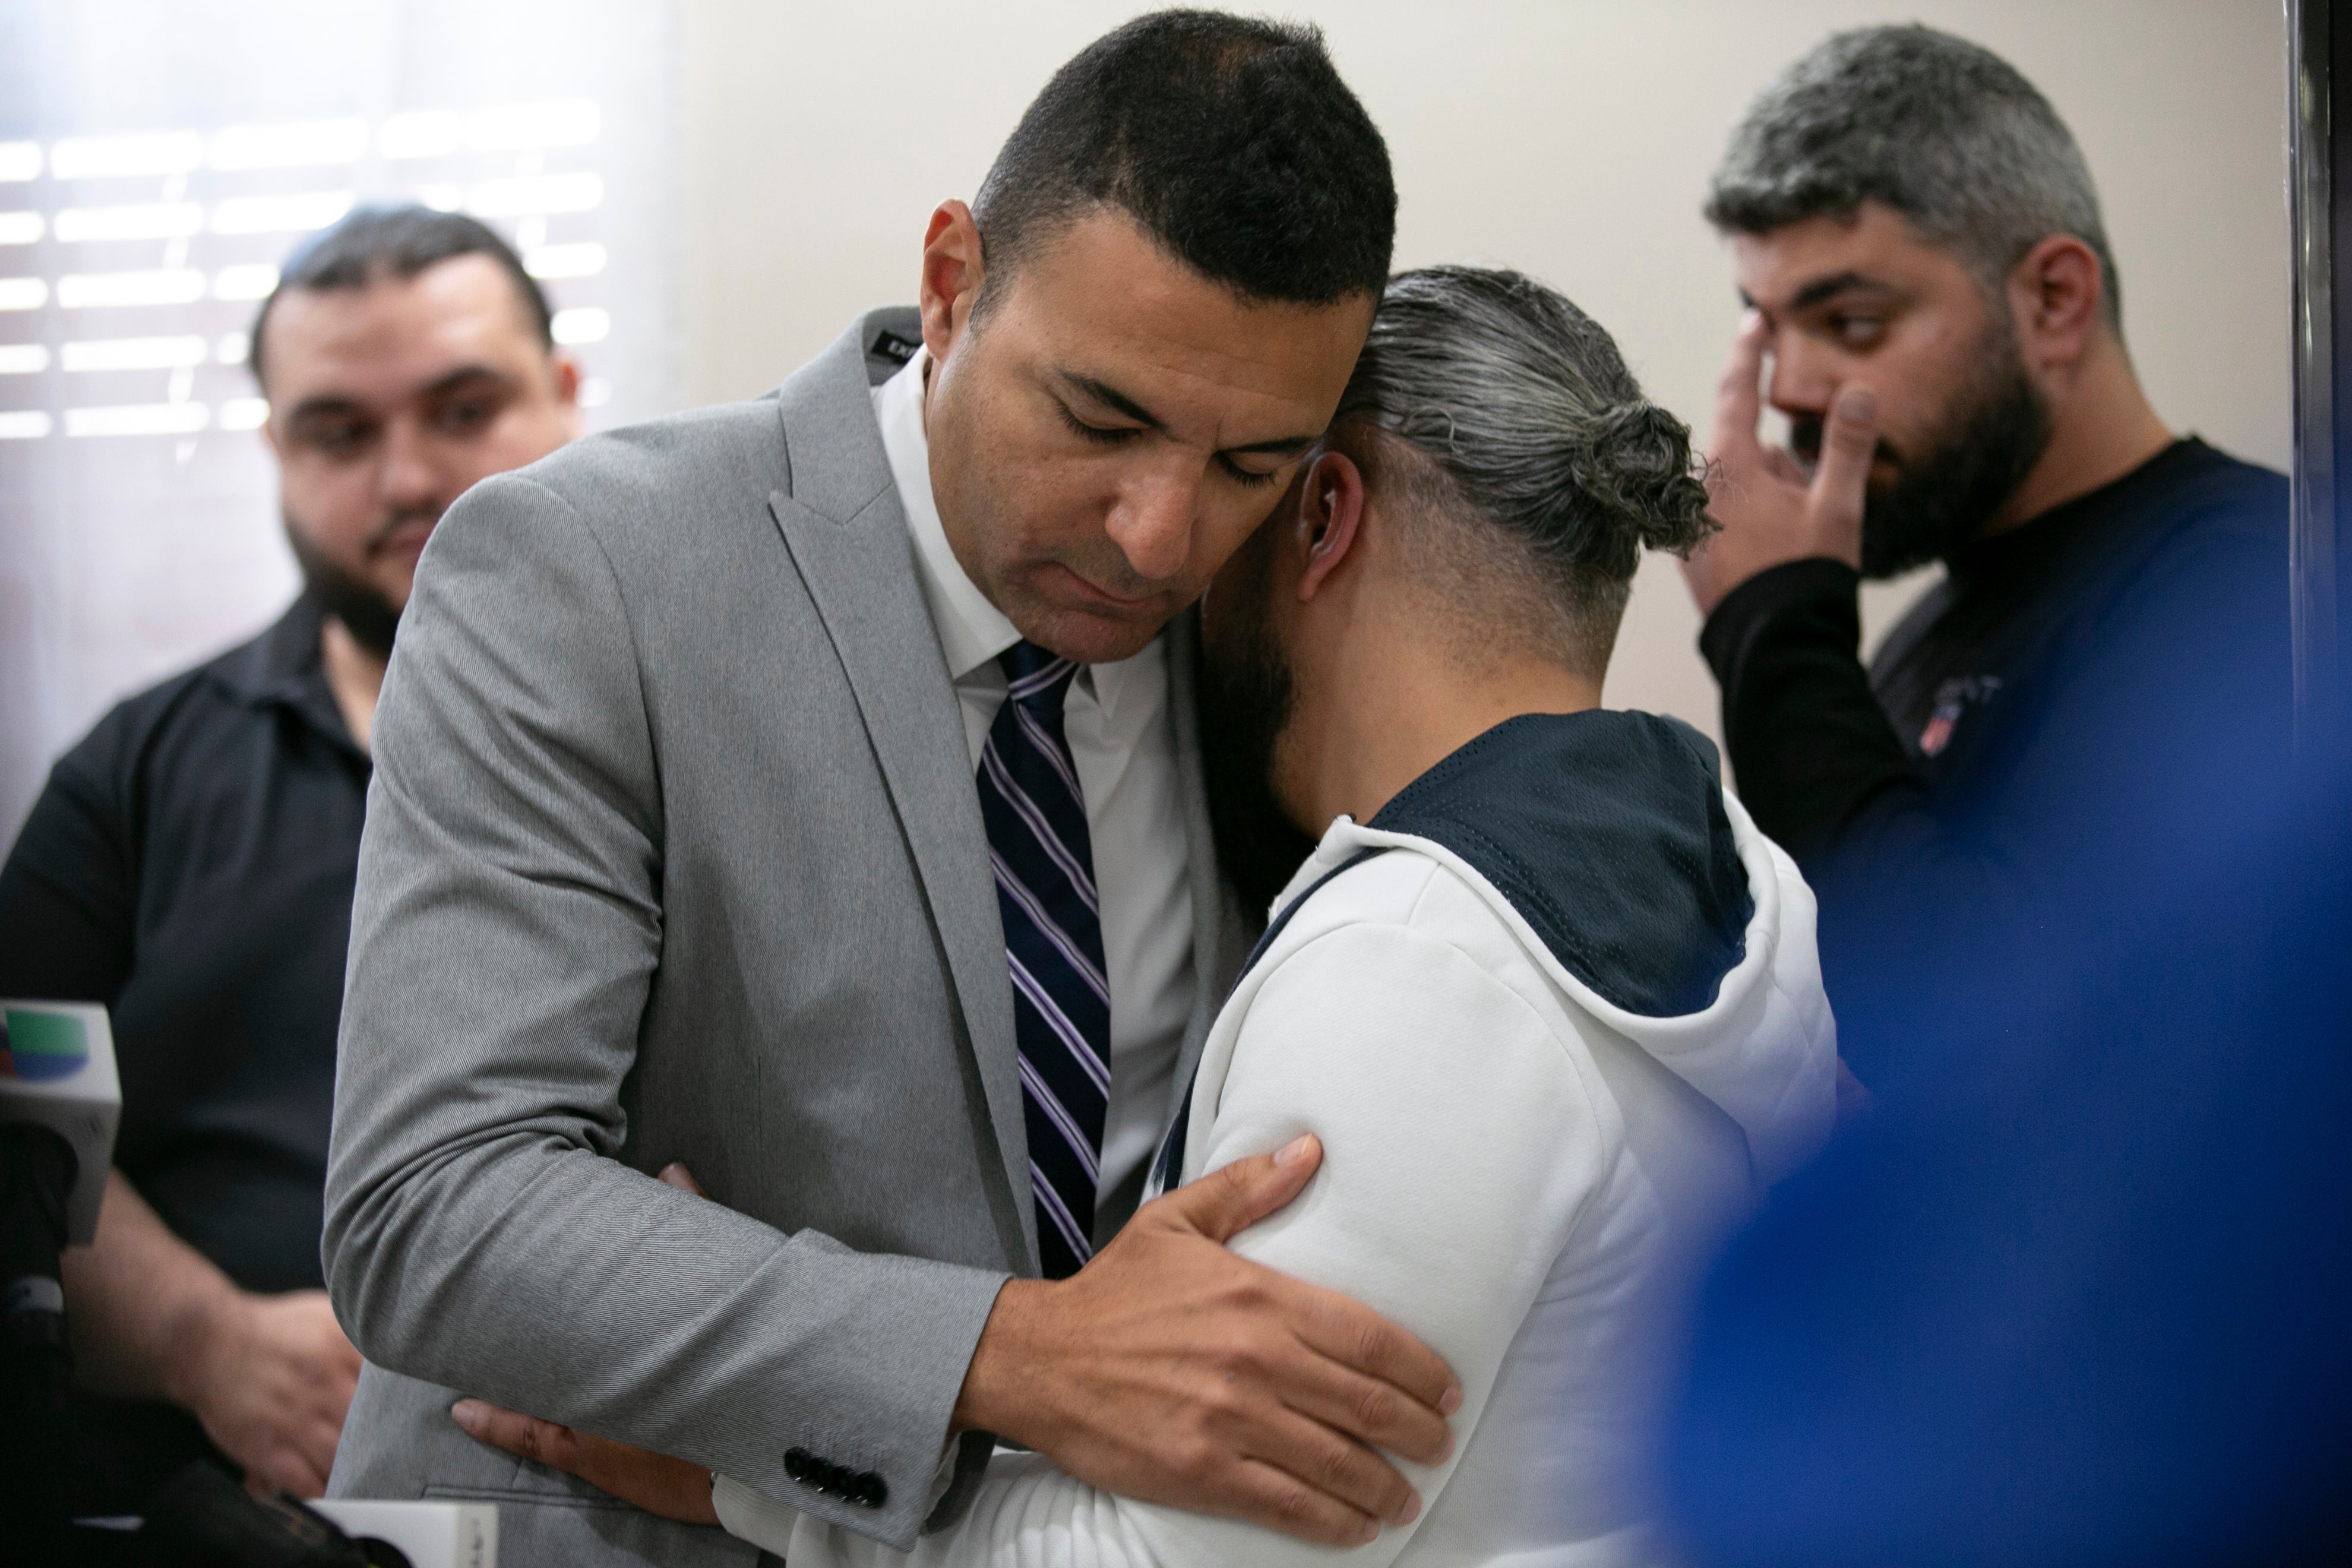 Ahmed Rehab, left, executive director of the Chicago chapter of the Council on American-Islamic Relations, embraces Odey Al-Fayoume, father of Wadea Al-Fayoume, on 15 October.